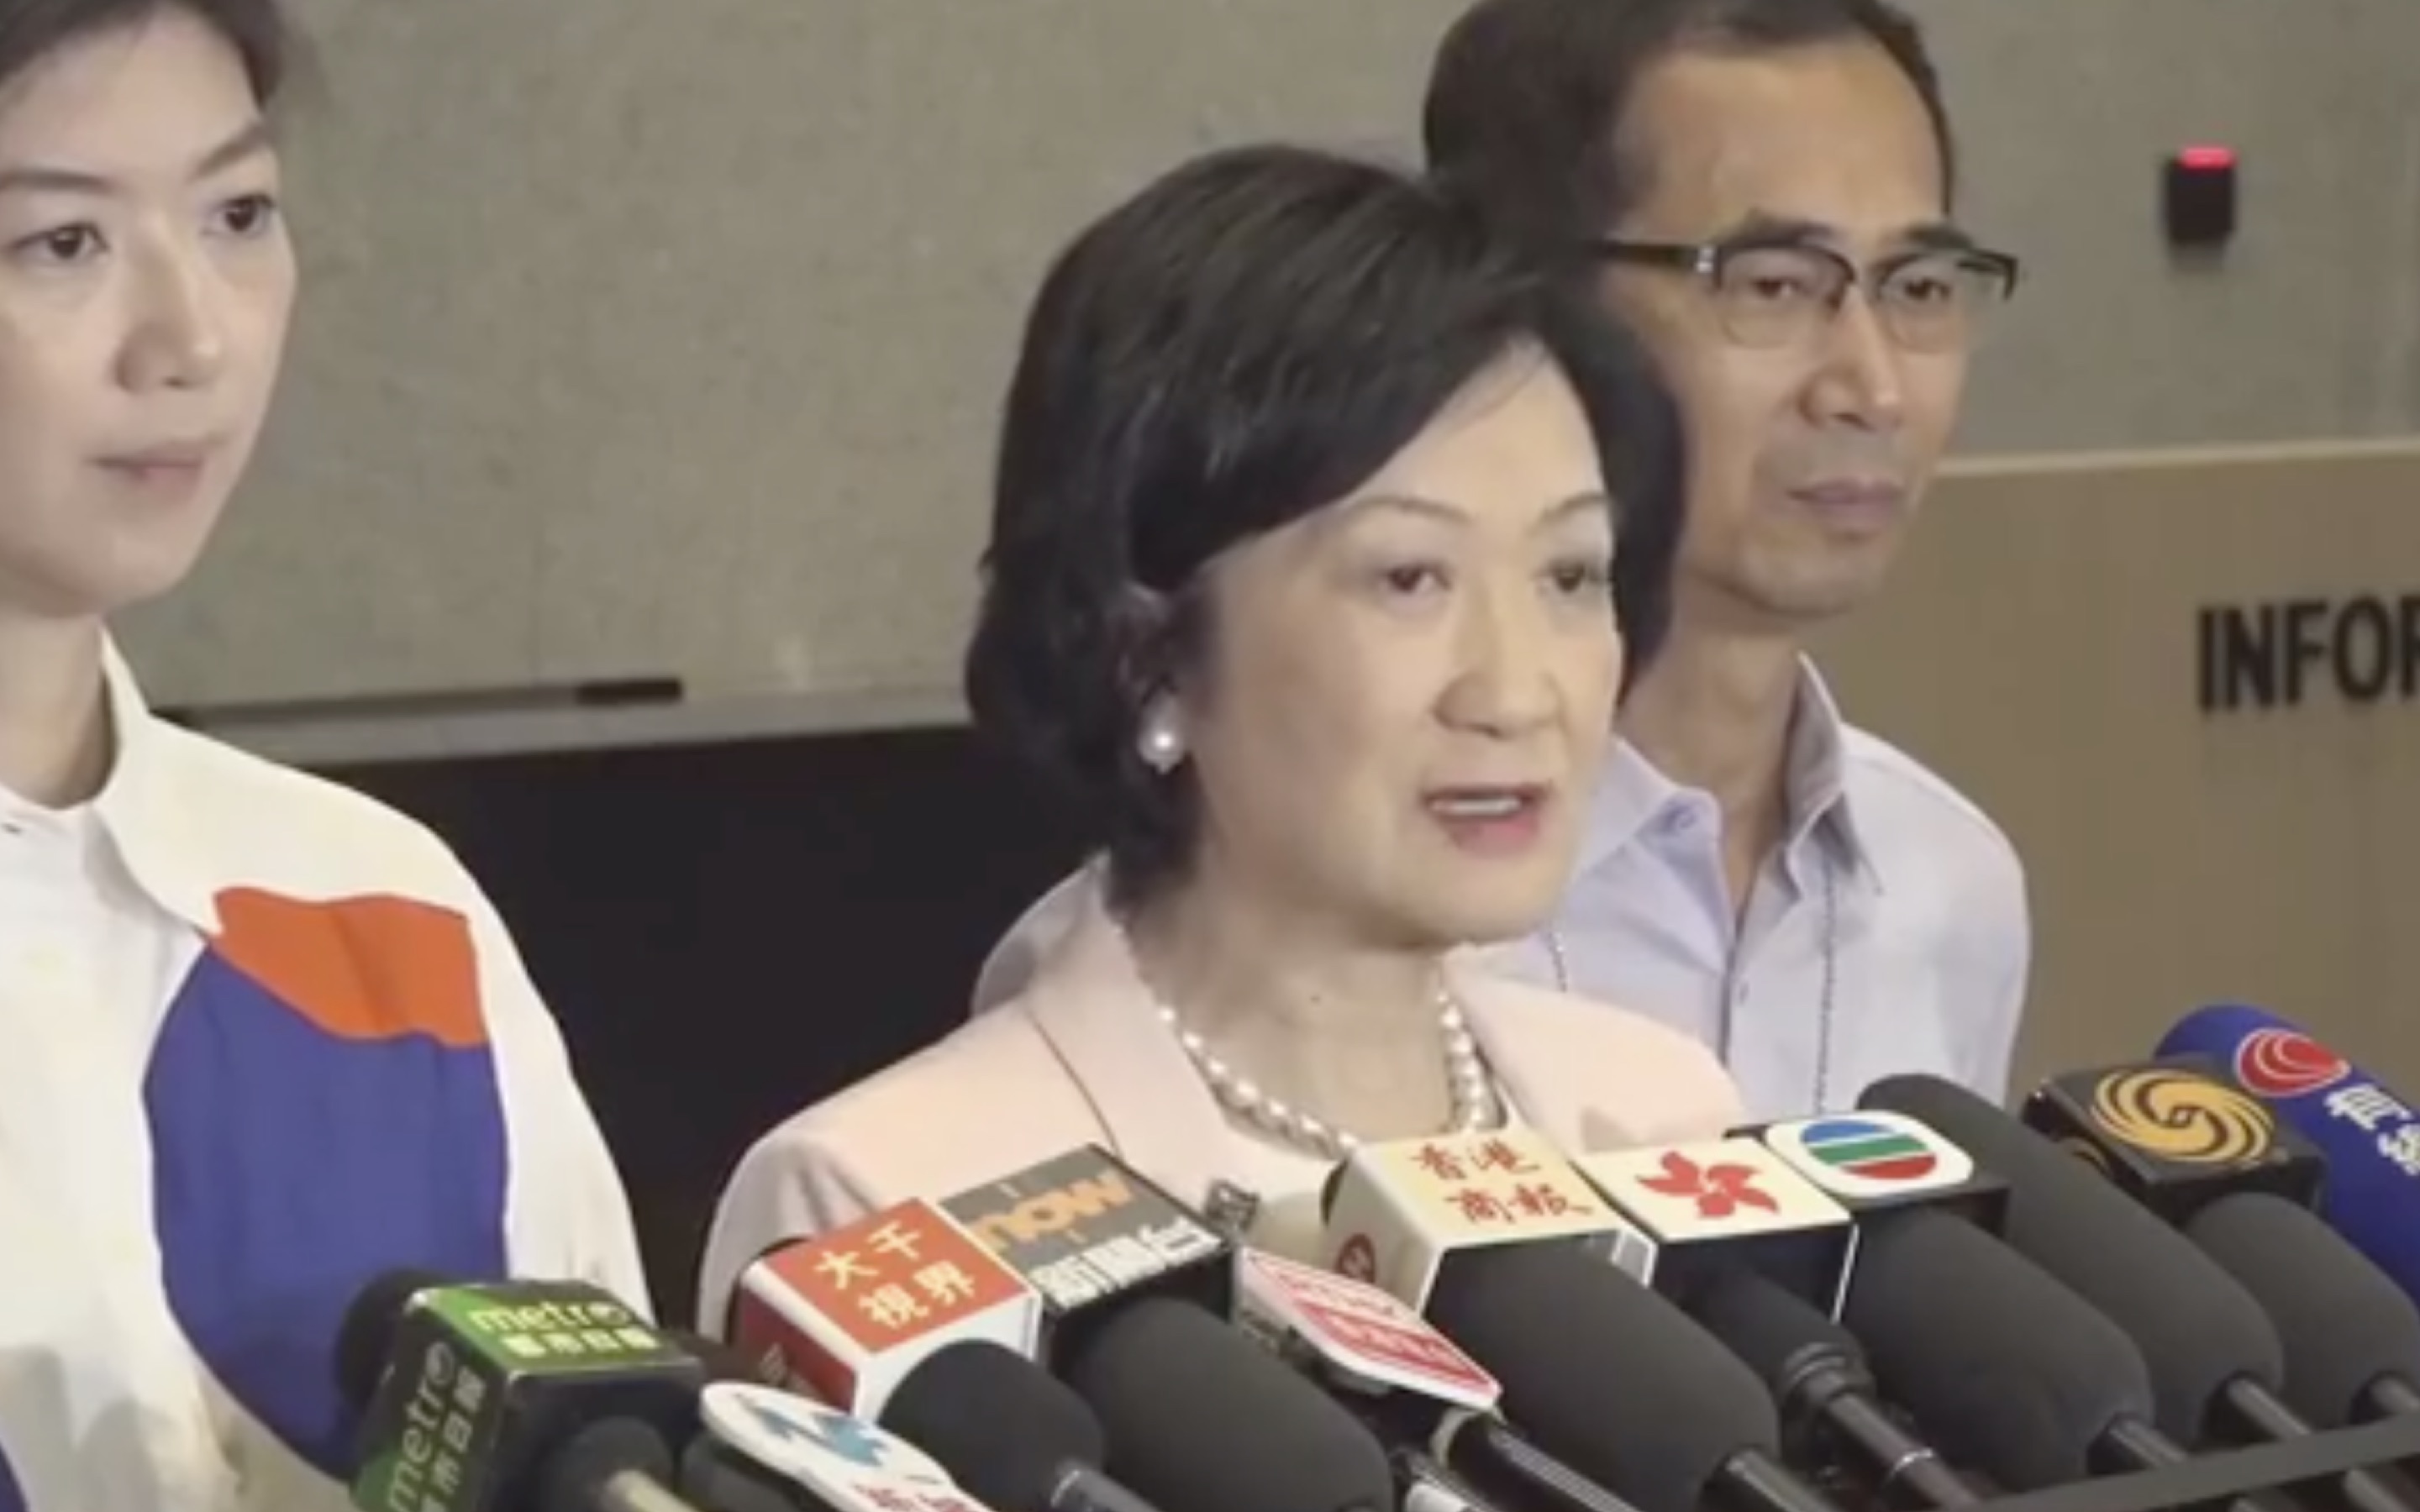 Pro-Beijing lawmaker Regina Ip tells reporters that she and her party the New People’s Party have suggested the government offer a cash handout to Hongkongers in next year’s budget. Screengrab via Facebook video.